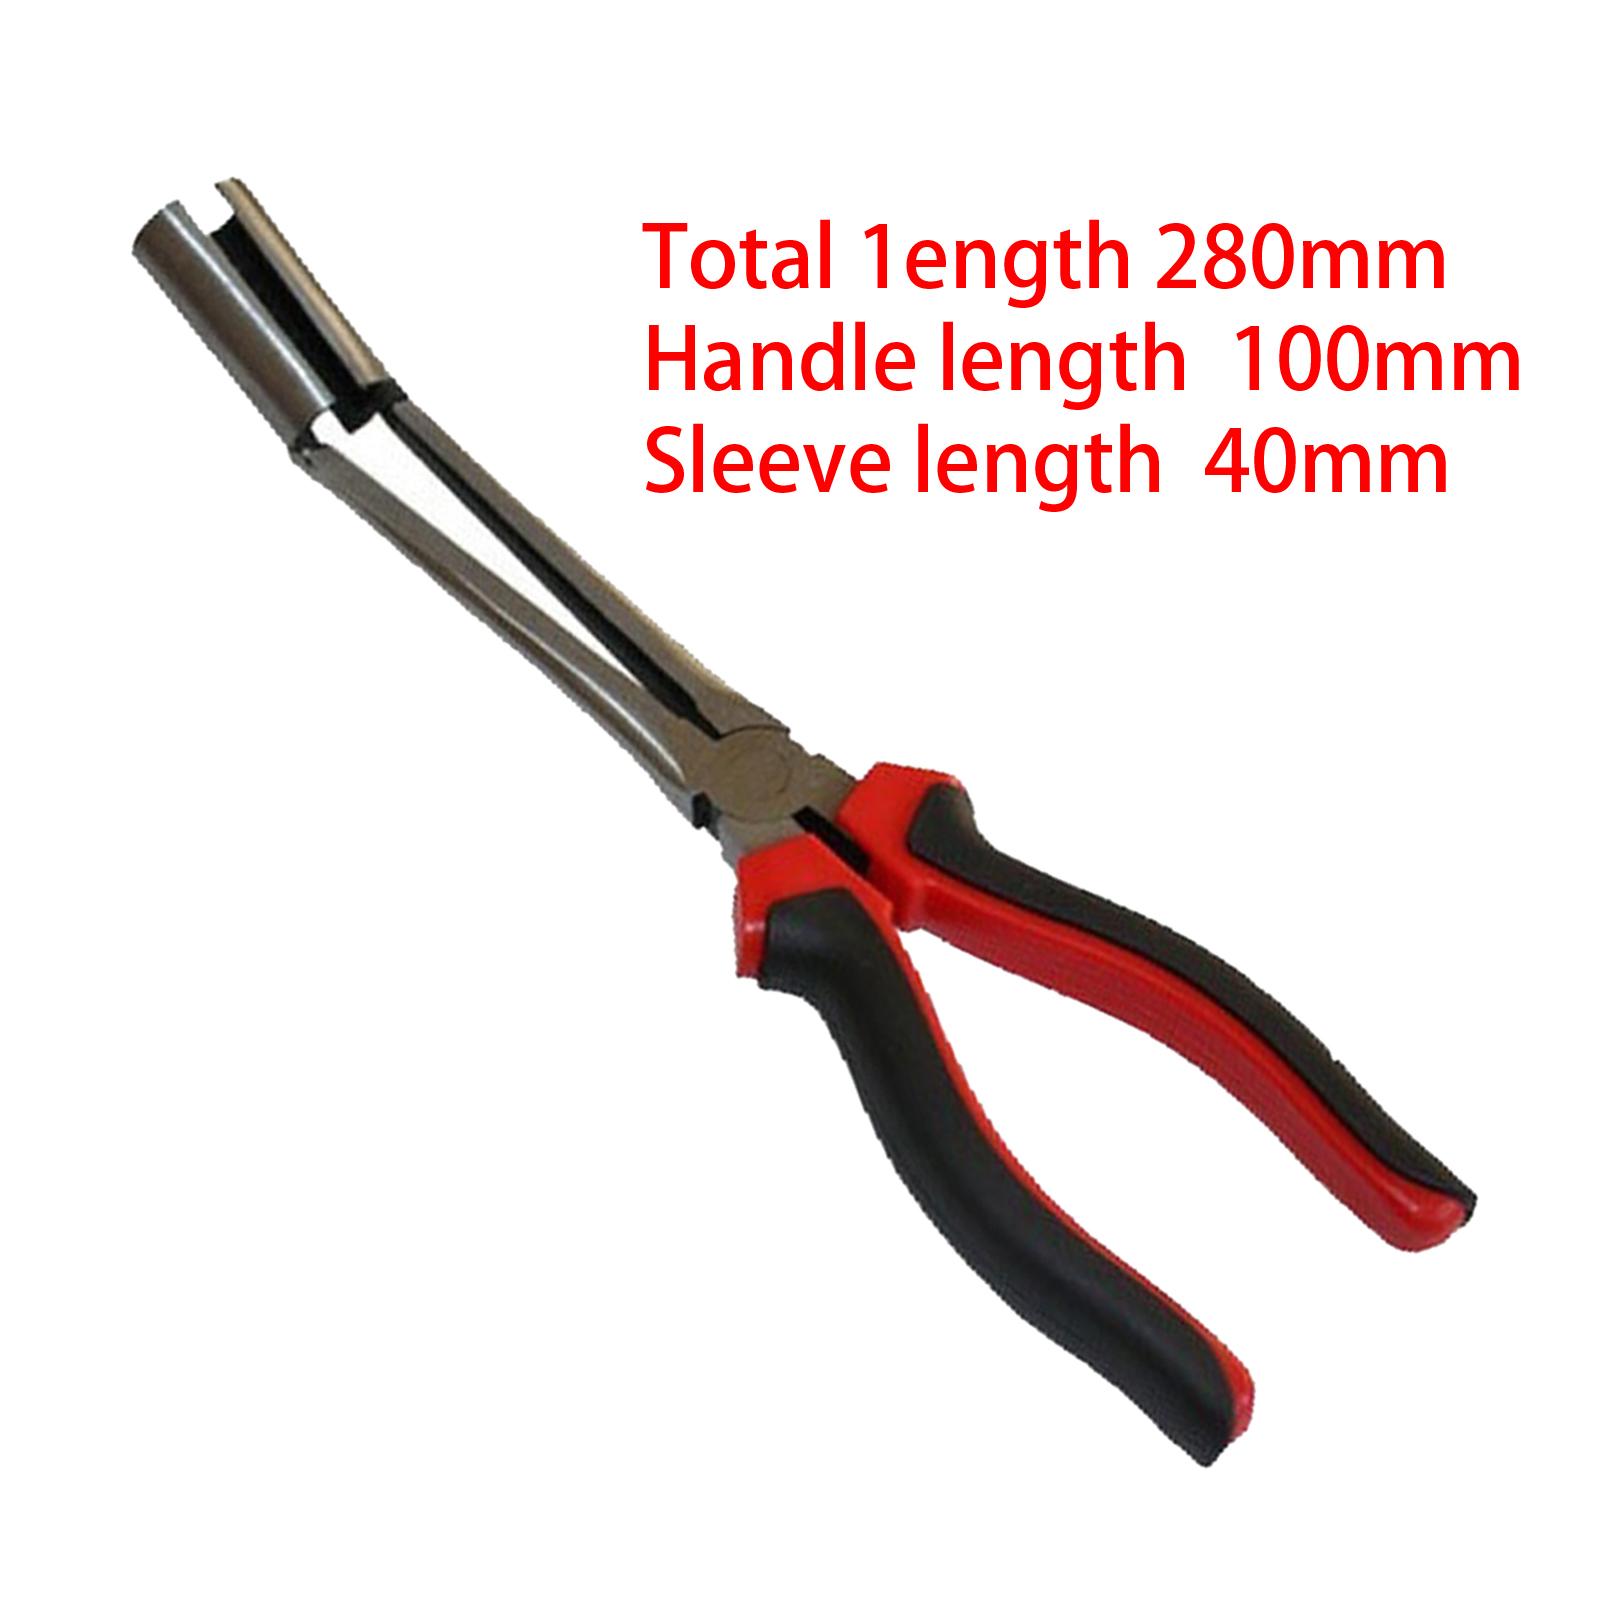 Spark Plug Wire Removal Pliers Tool Carbon Steel High Voltage Wire Clamp Sleeve Head